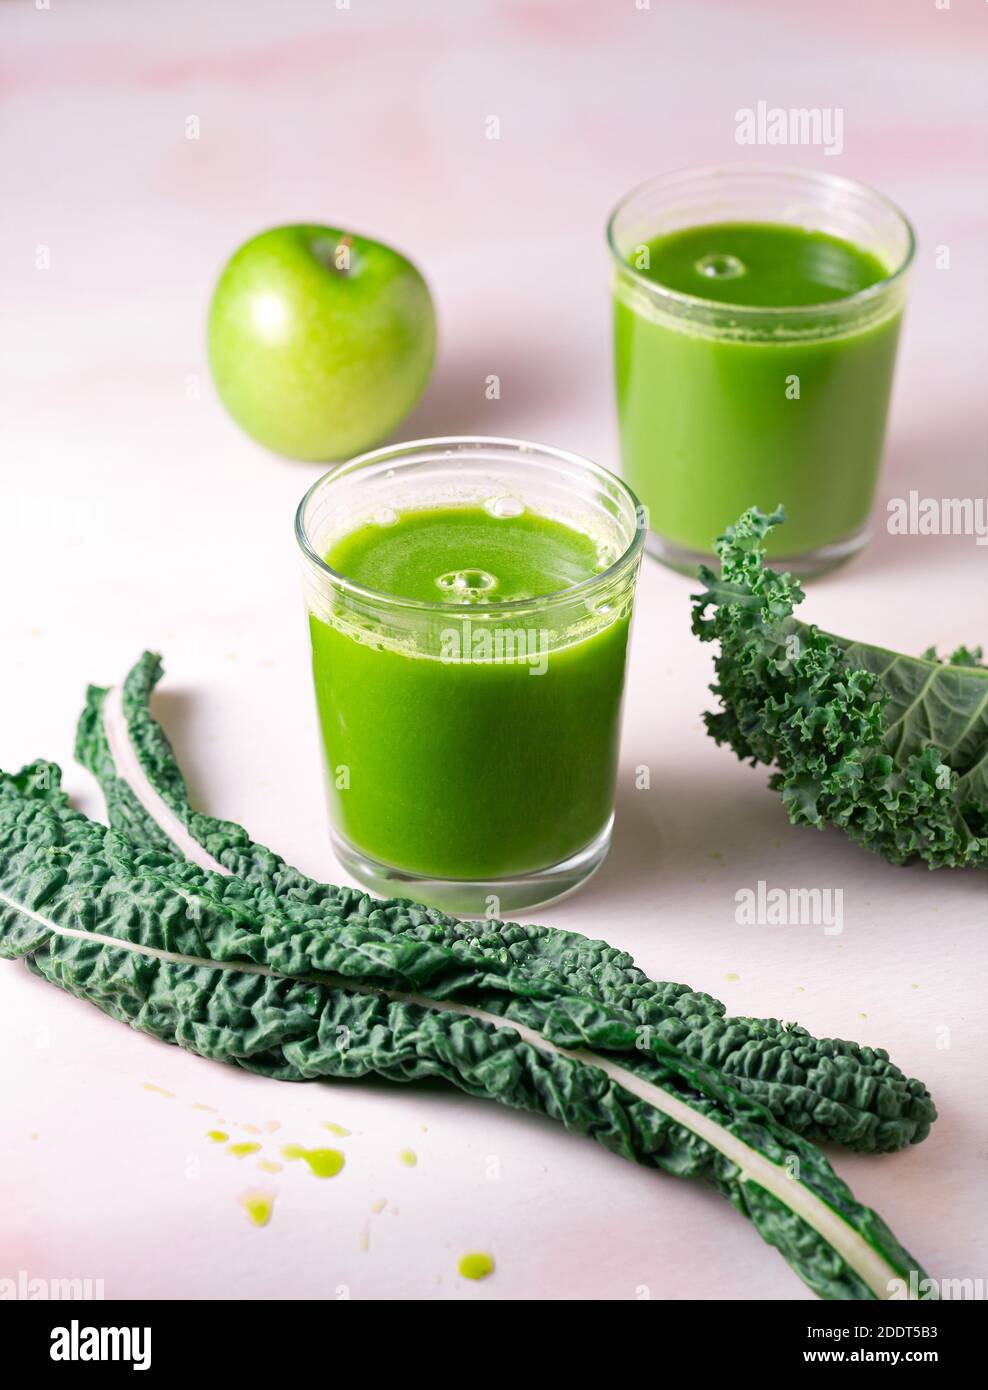 Two glasses of fresh green juice made from kale and green apples Stock Photo